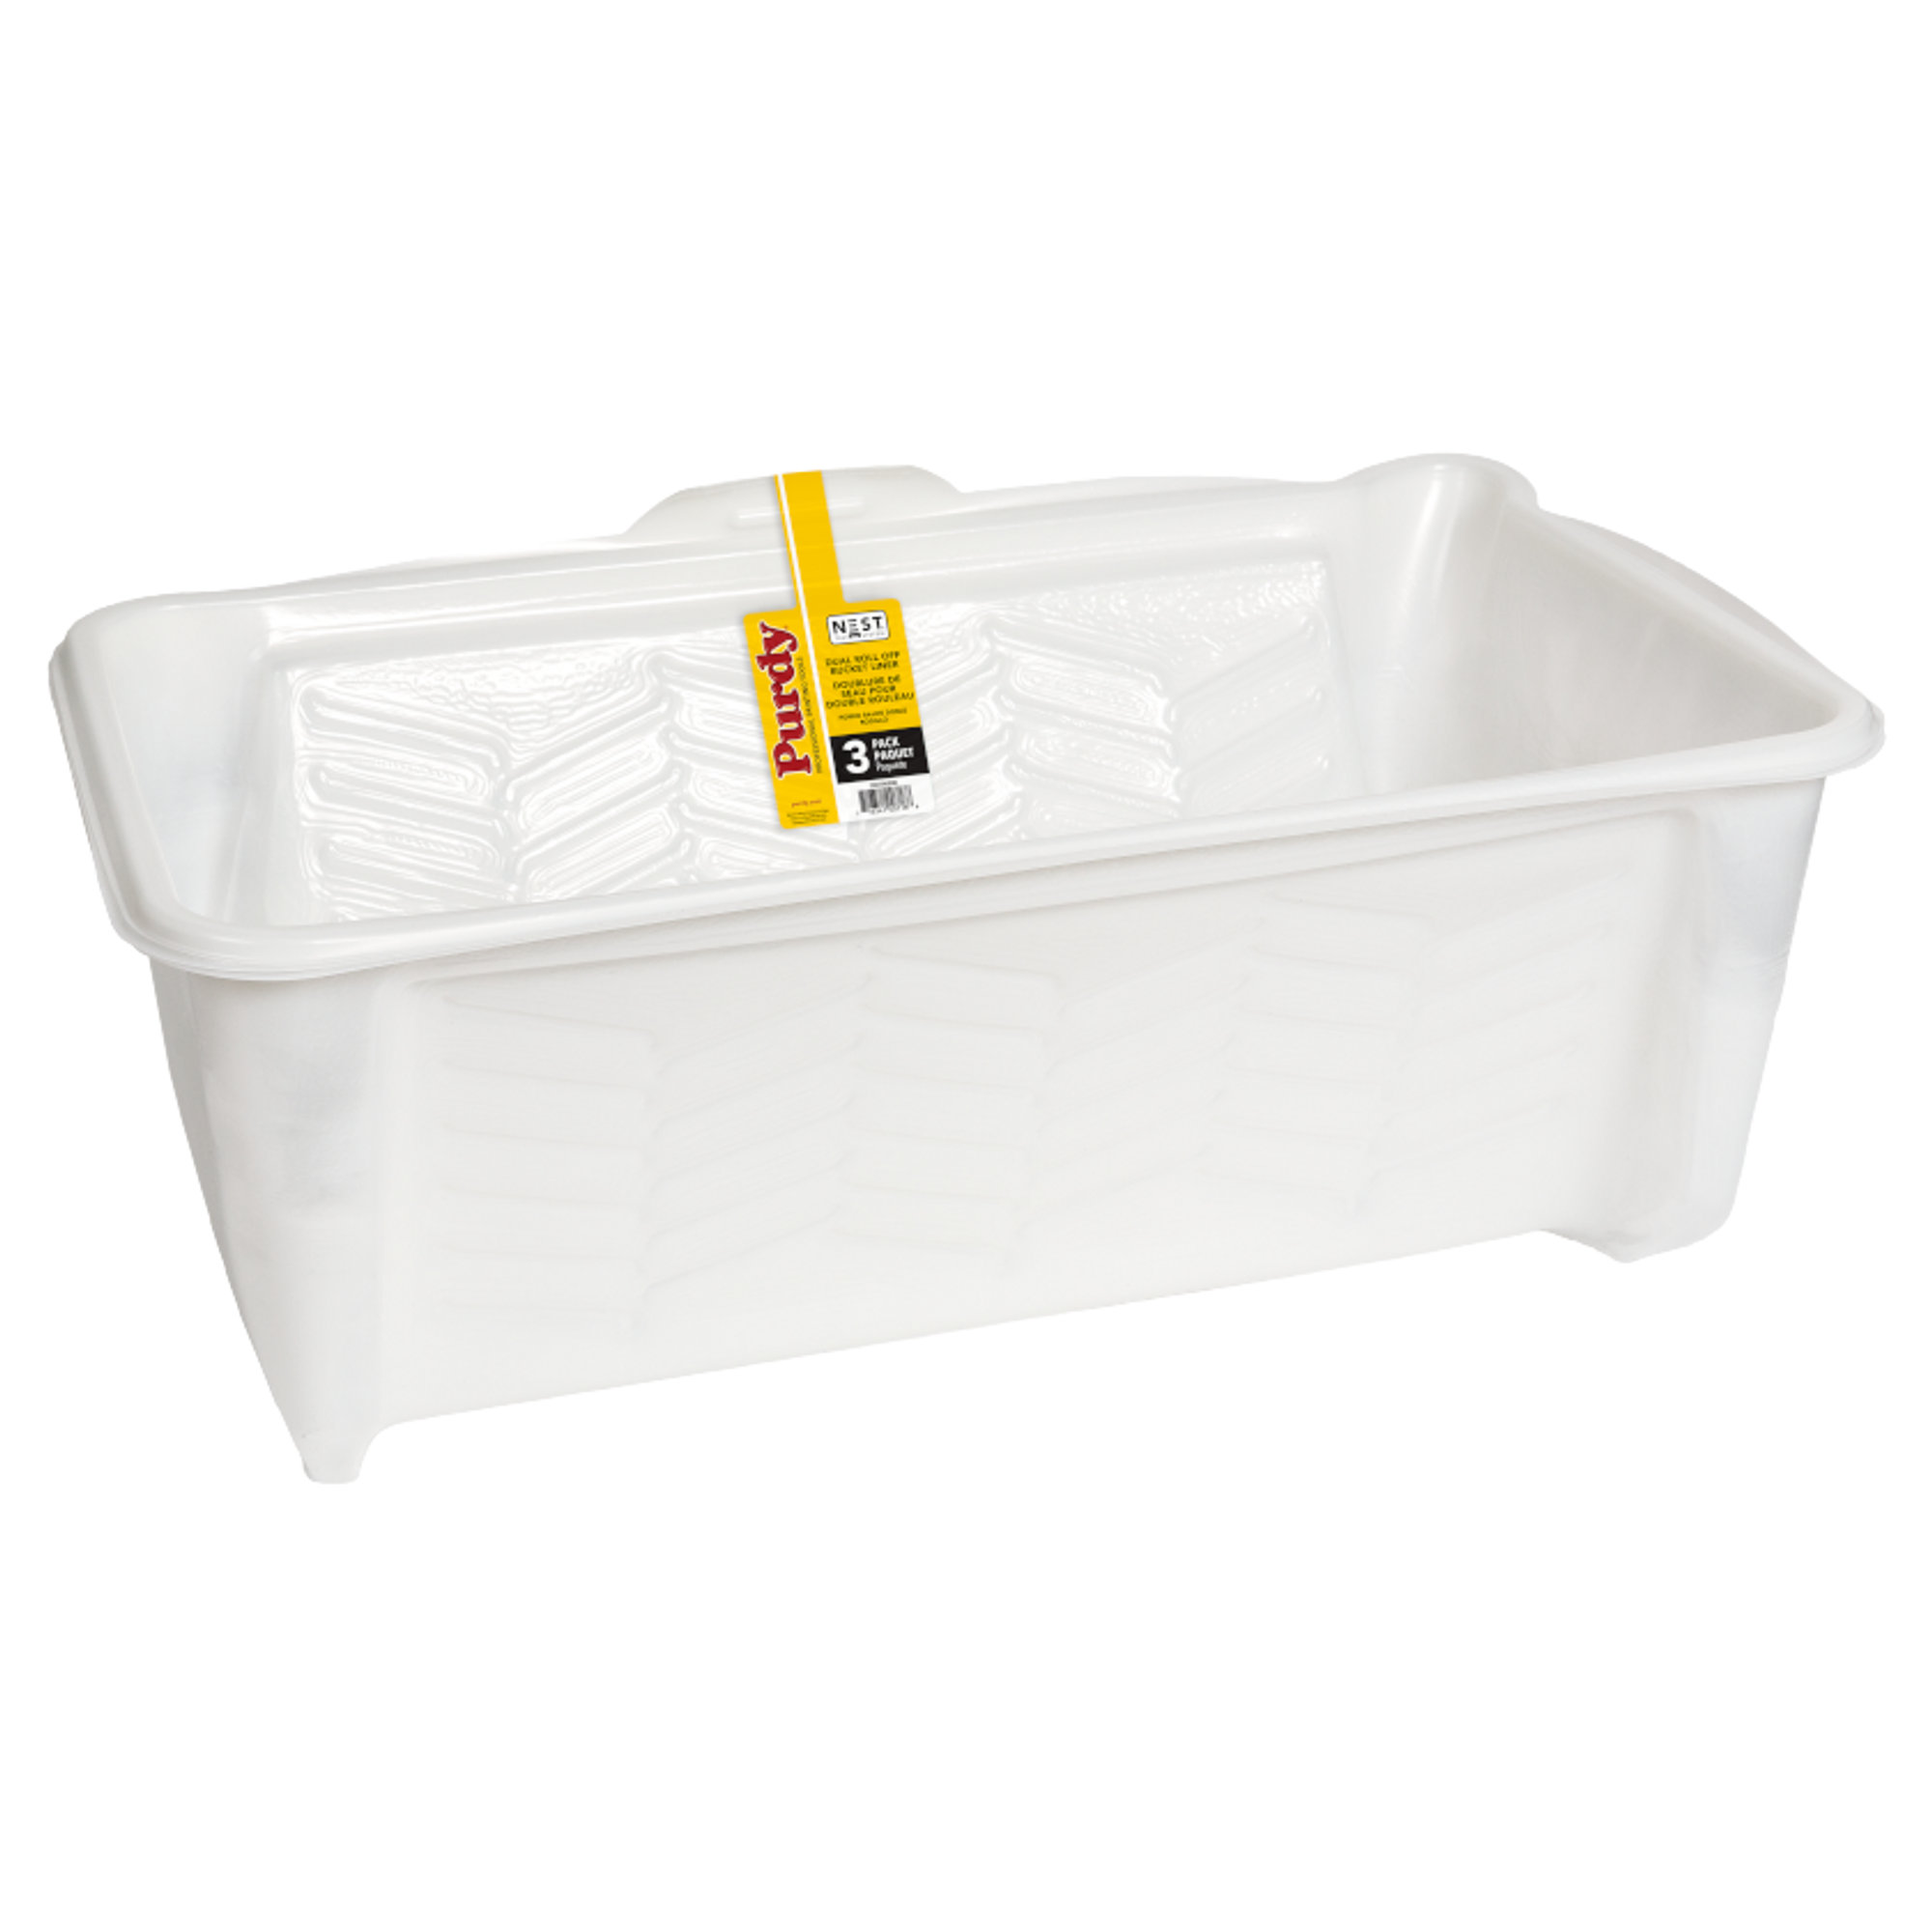 Purdy NEST Plastic 18 in. W x 27 in. L 1-1/2 gal. Paint Tray Liner